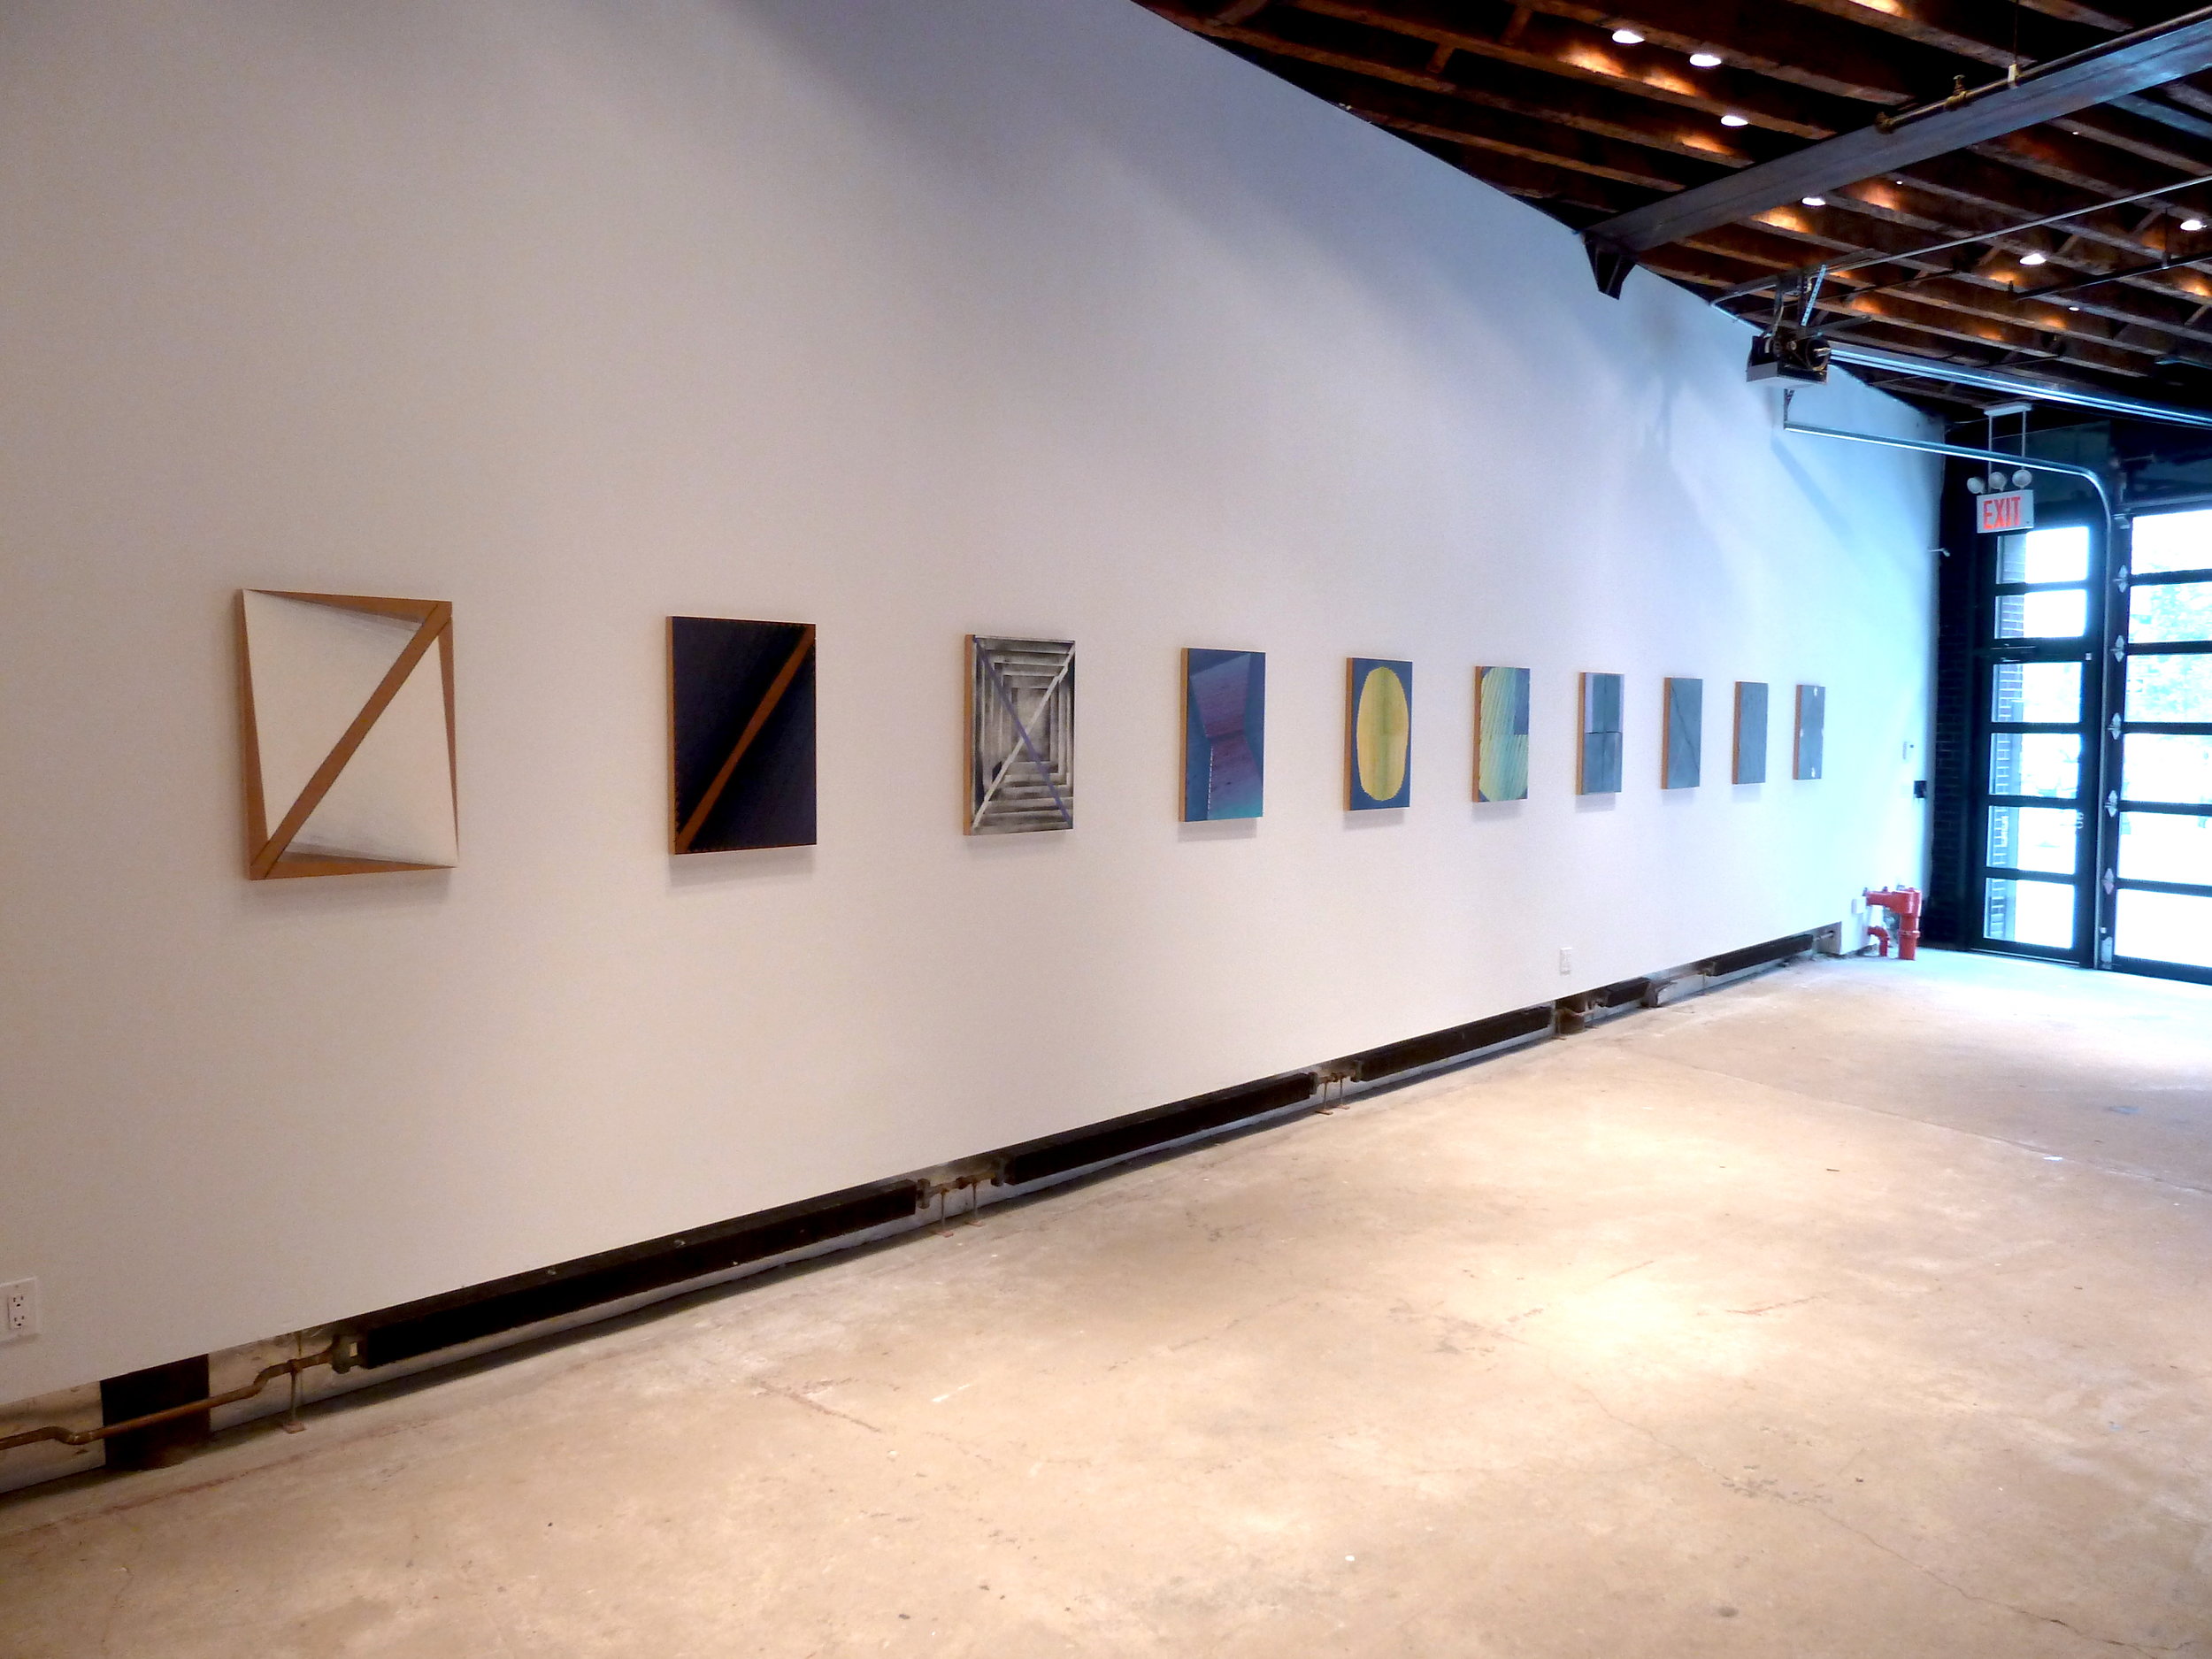  Solo show at Guided by Invoices Gallery, New York, NY. 2012. Photo: Rafael Vega 